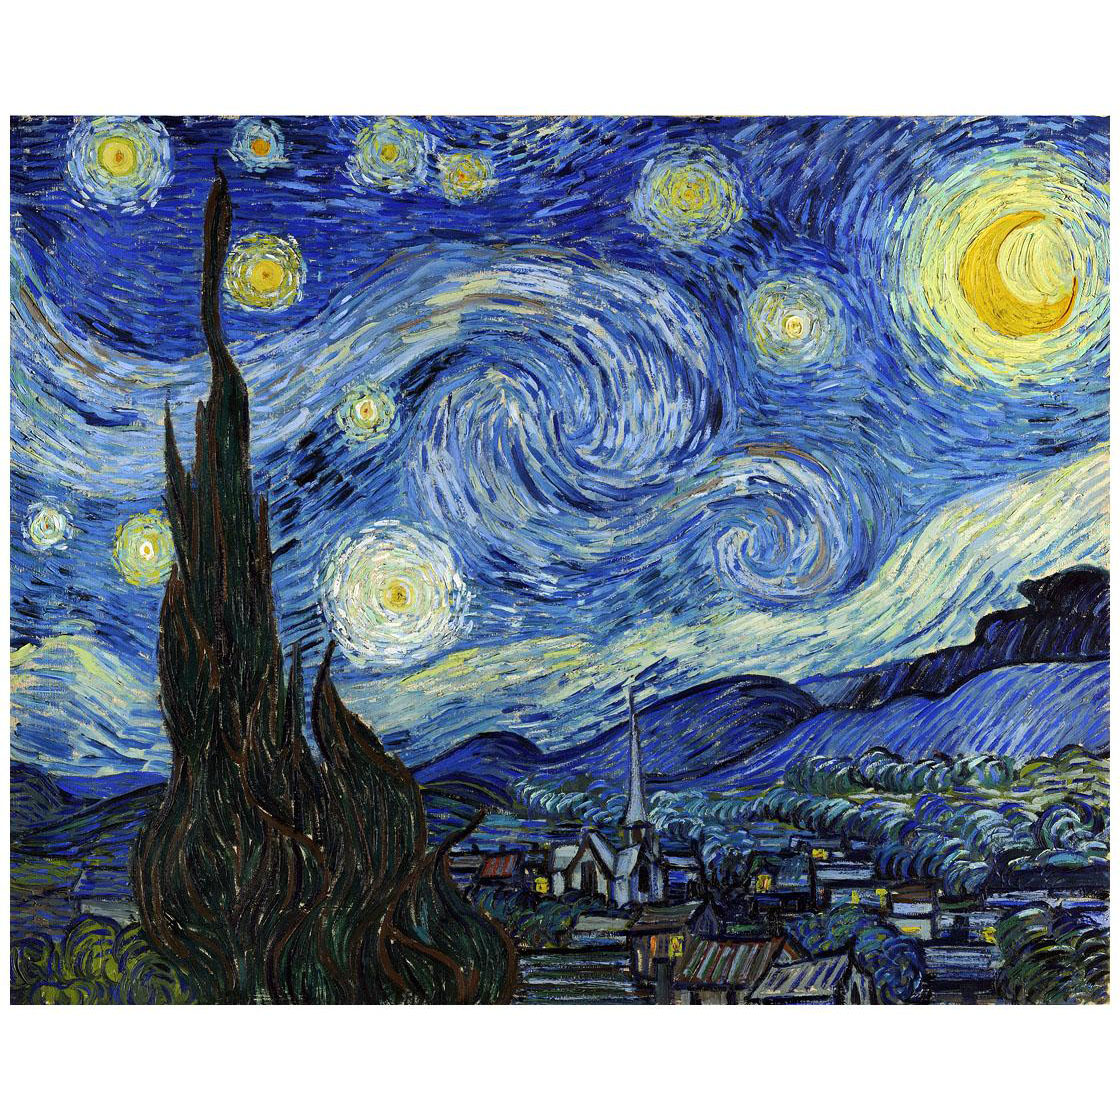 Vincent van Gogh. The Starry Night. 1889. MoMA